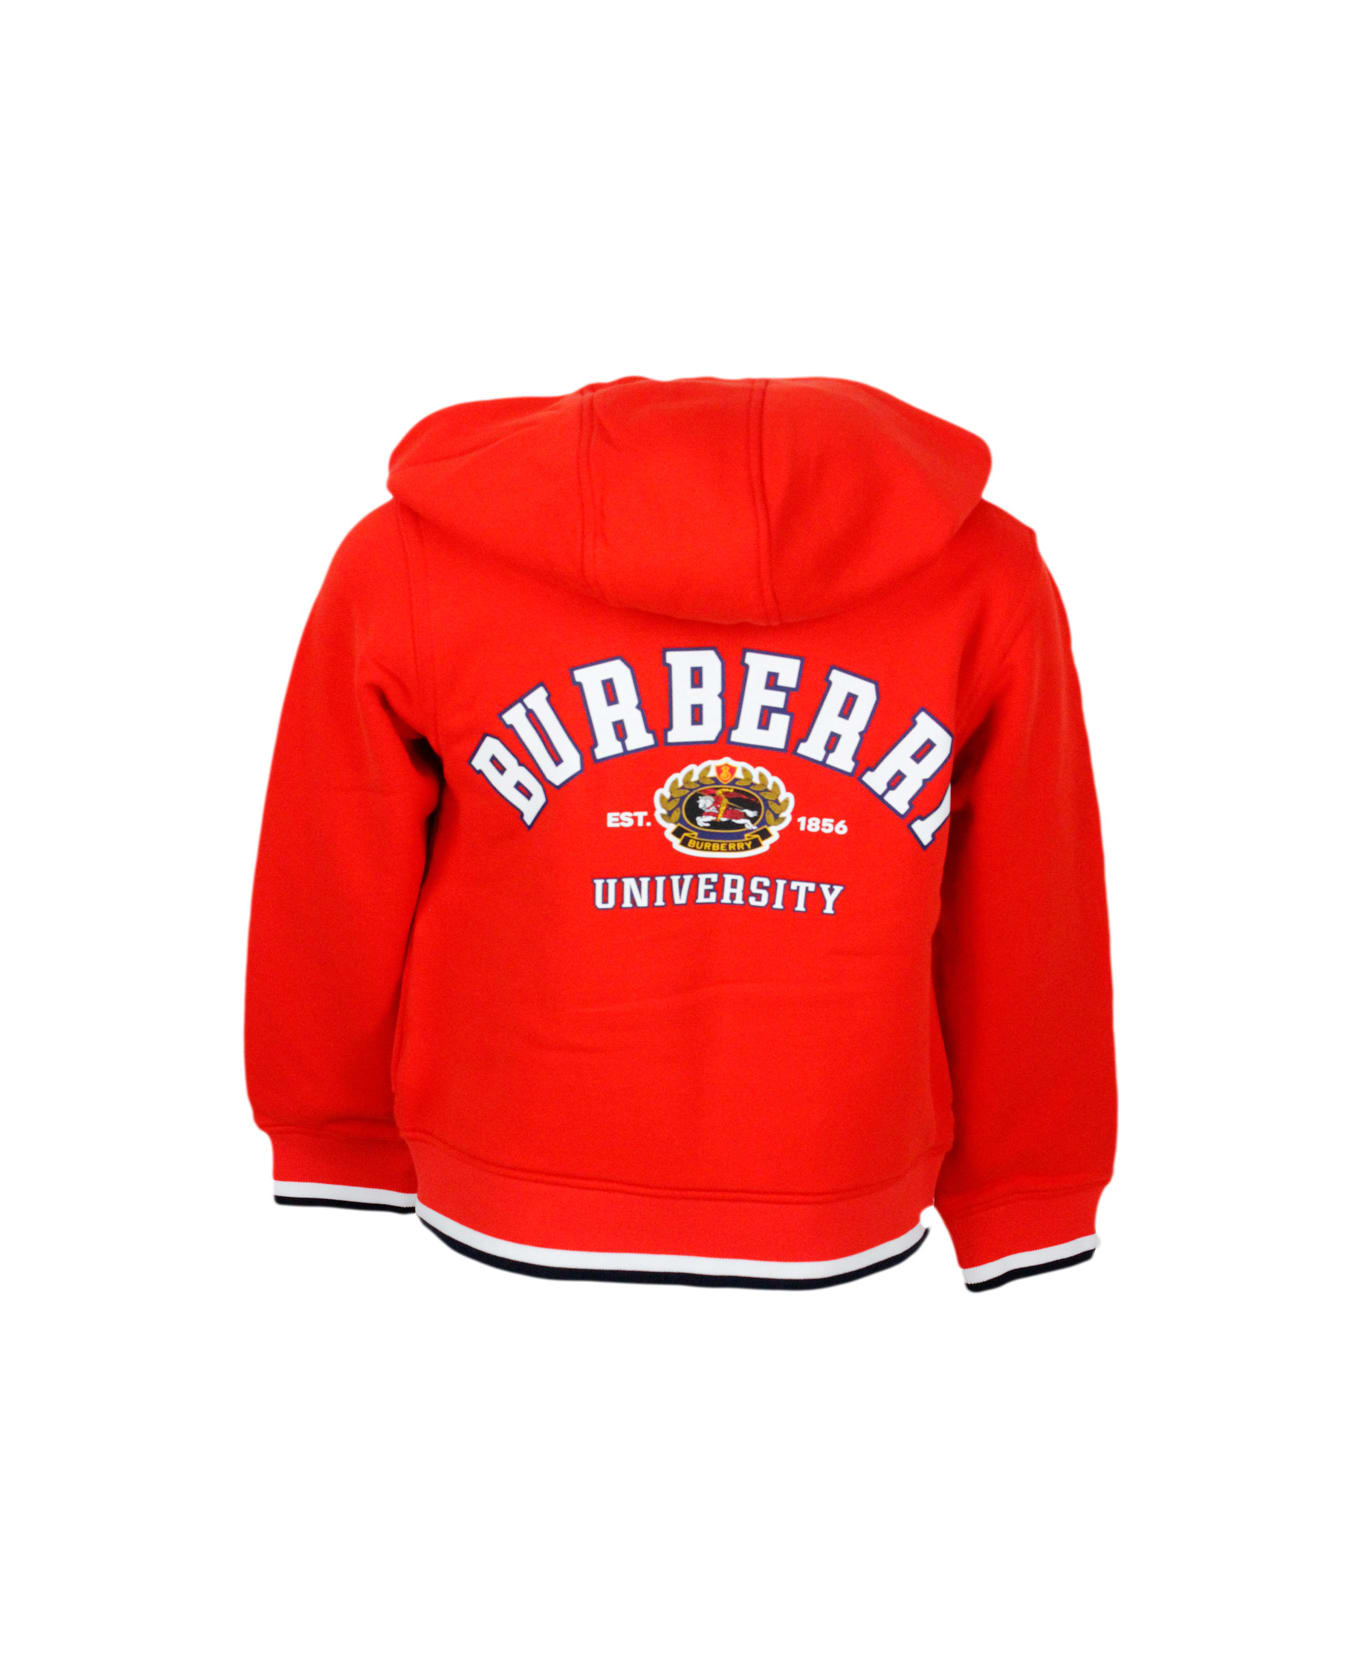 Burberry Sweatshirt With Hood And Zip Closure In Cotton Jersey With University Logo Lettering Prints On The Back - Red